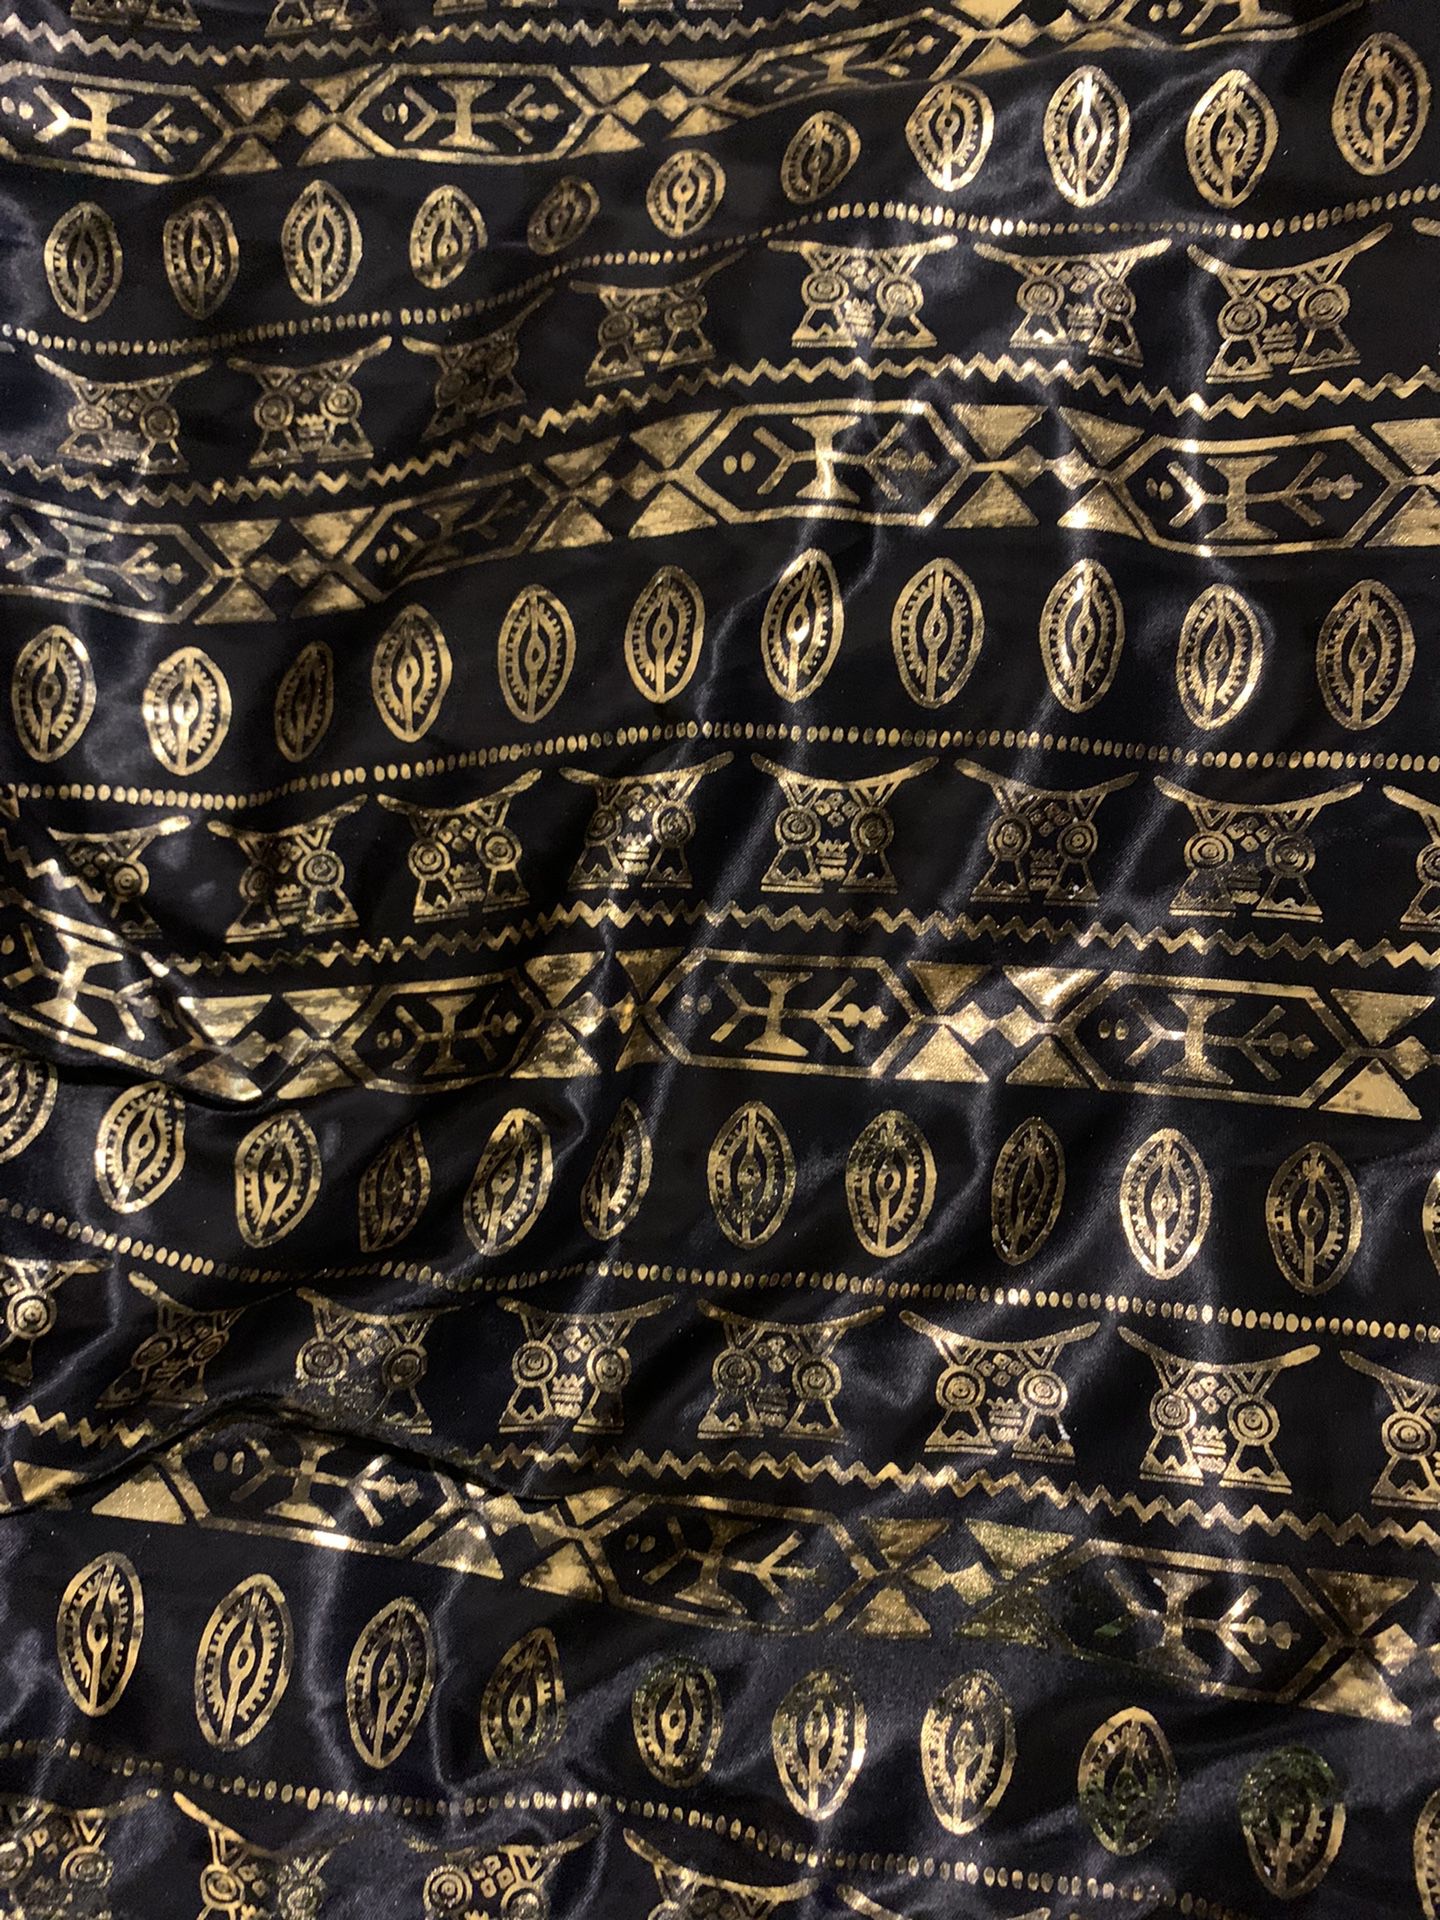 AFRICAN PRINT MATERIAL FROM NIGERIA  $6/yard 